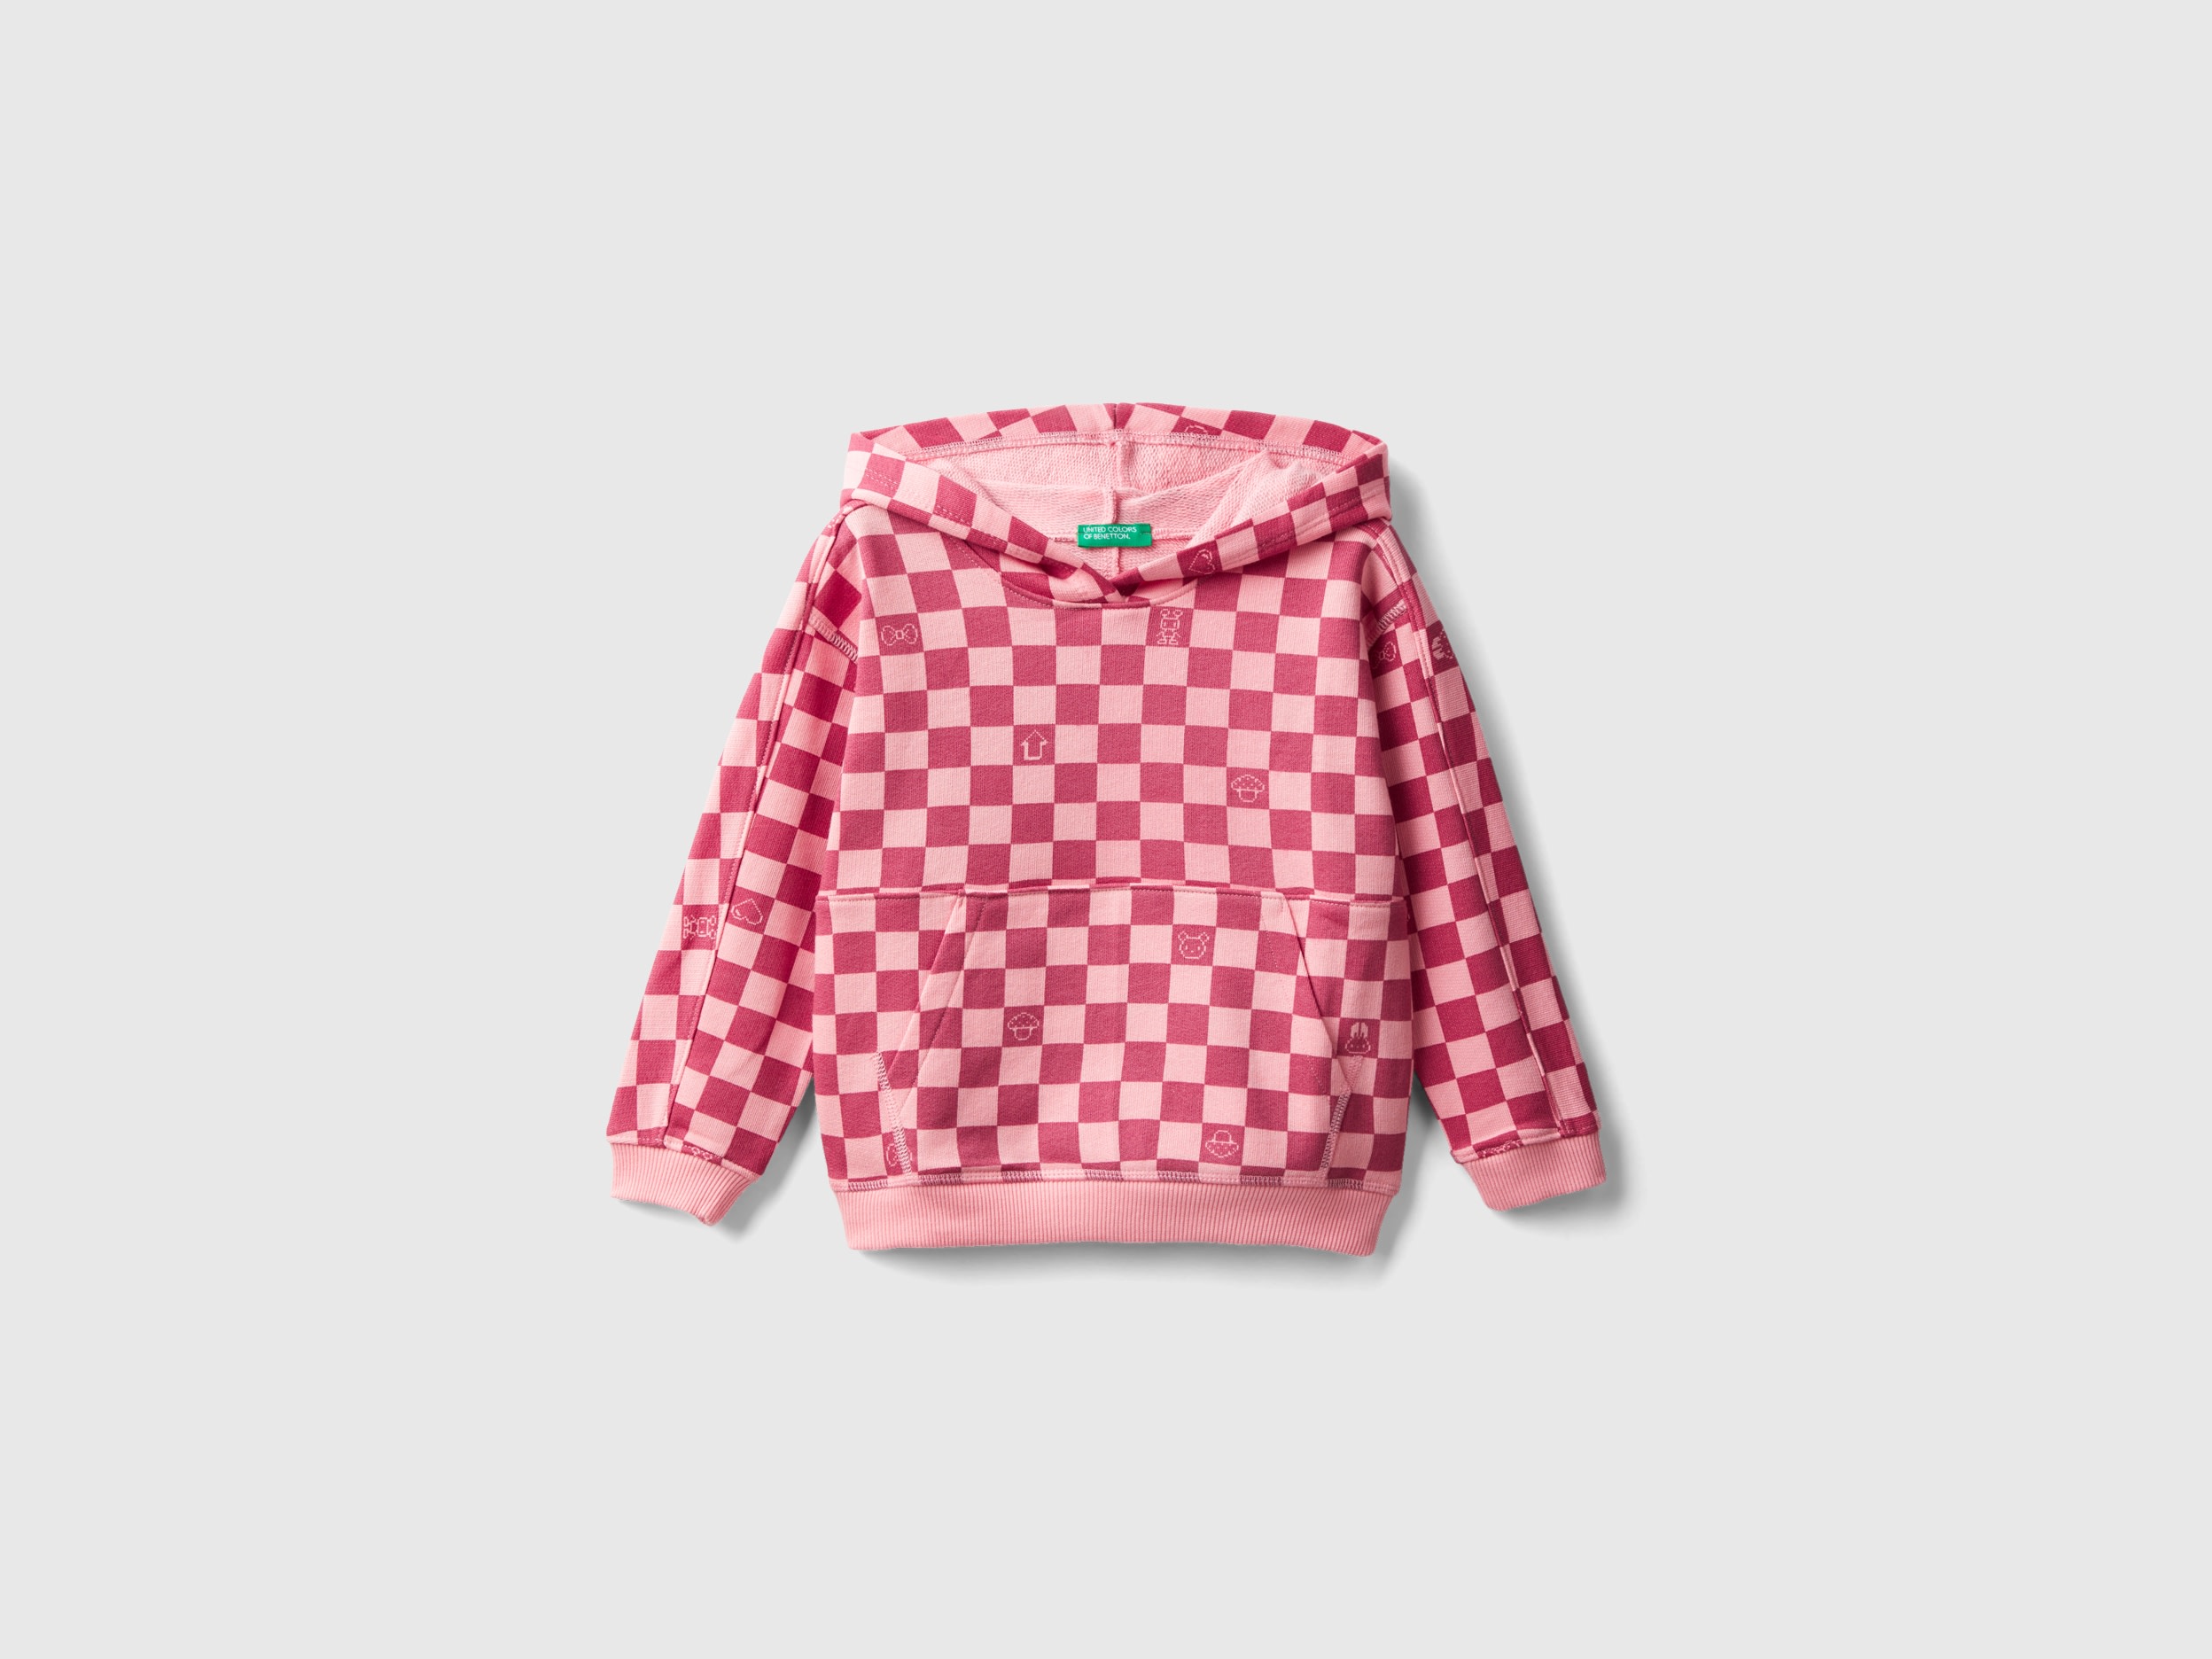 Benetton, Checkered Hoodie, size 18-24, Multi-color, Kids